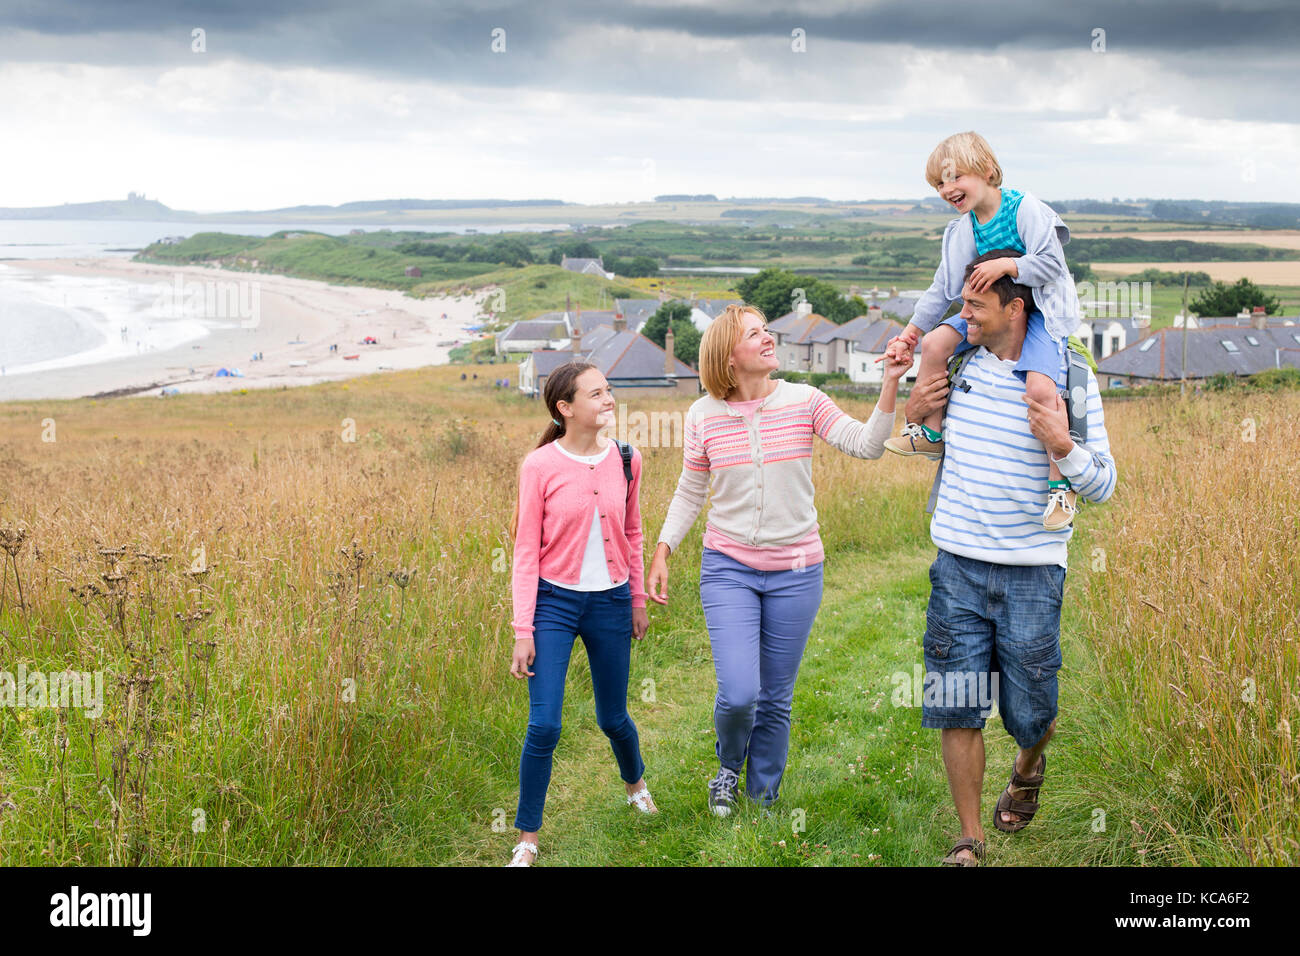 A family of four are walking on the sand dunes together. The son is sitting on his fathers shoulders. They all look happy and are smiling. Stock Photo